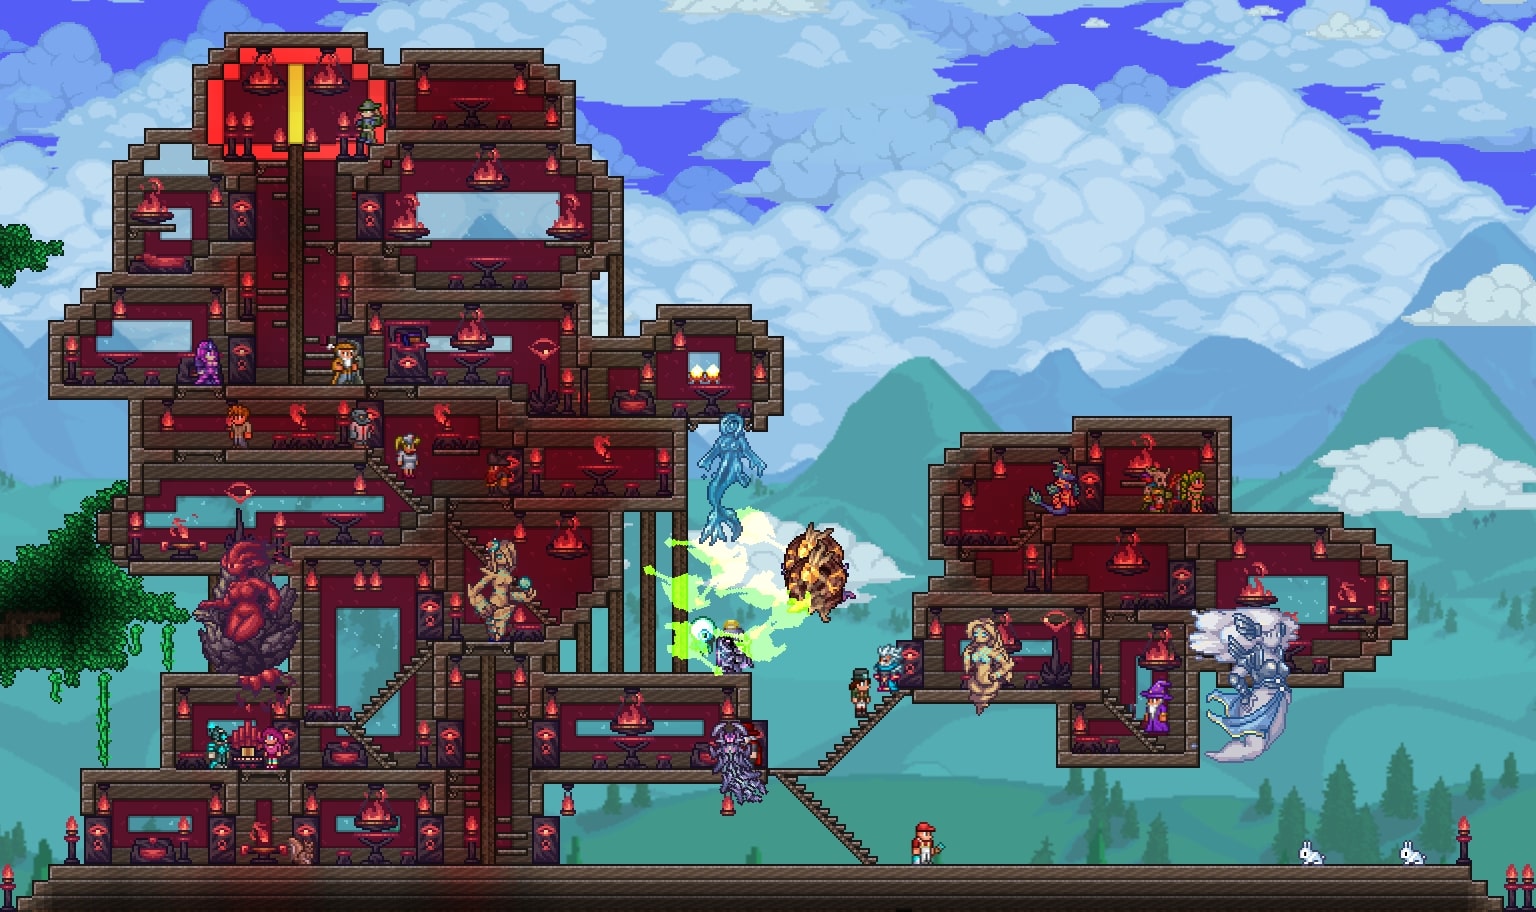 Best Mods for Playing Modded Terraria Servers